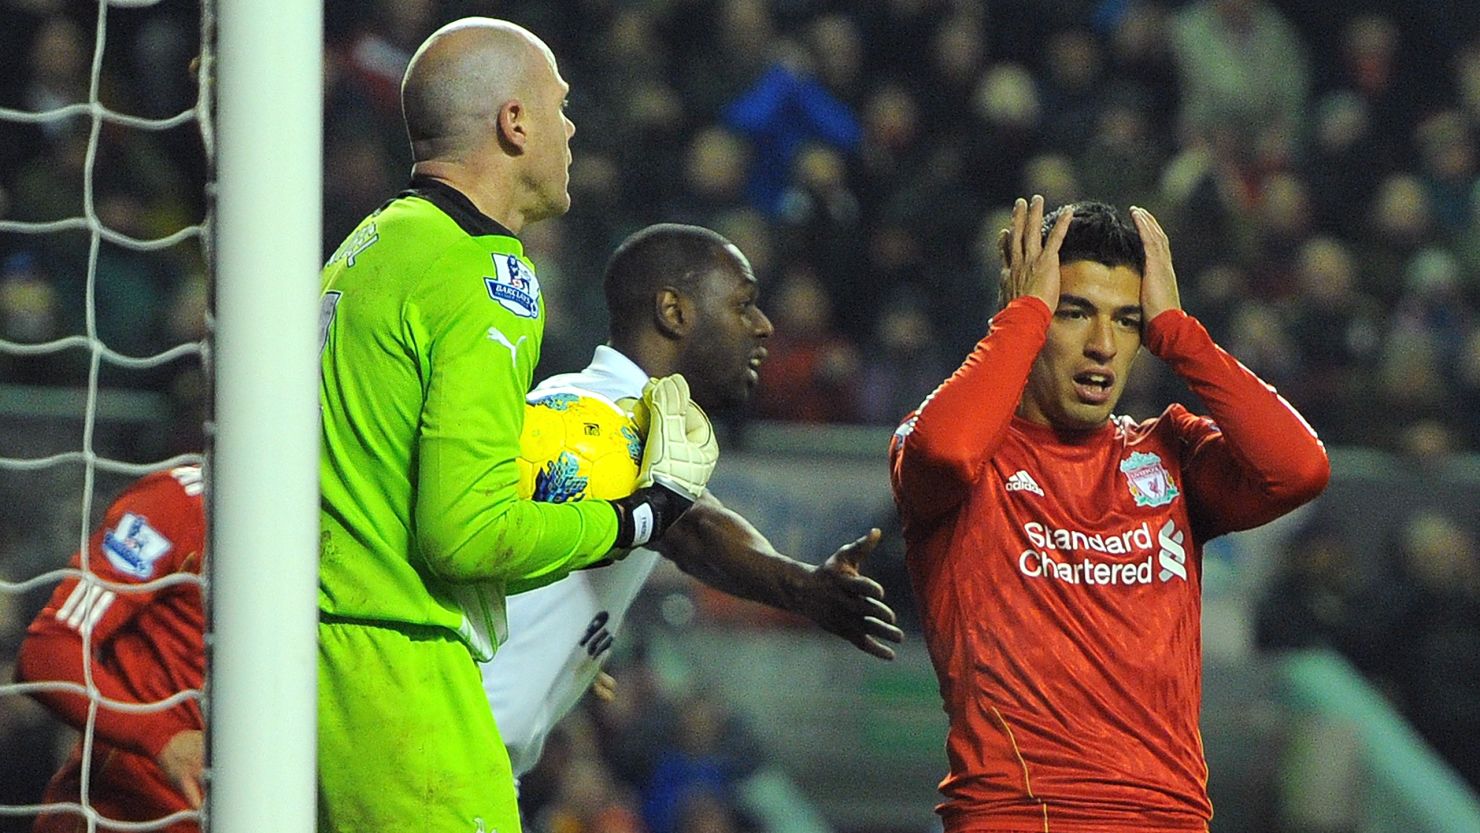 Luis Suarez returned for Liverpool but couldn't prevent his side drawing 0-0 with Tottenham Hotspur.